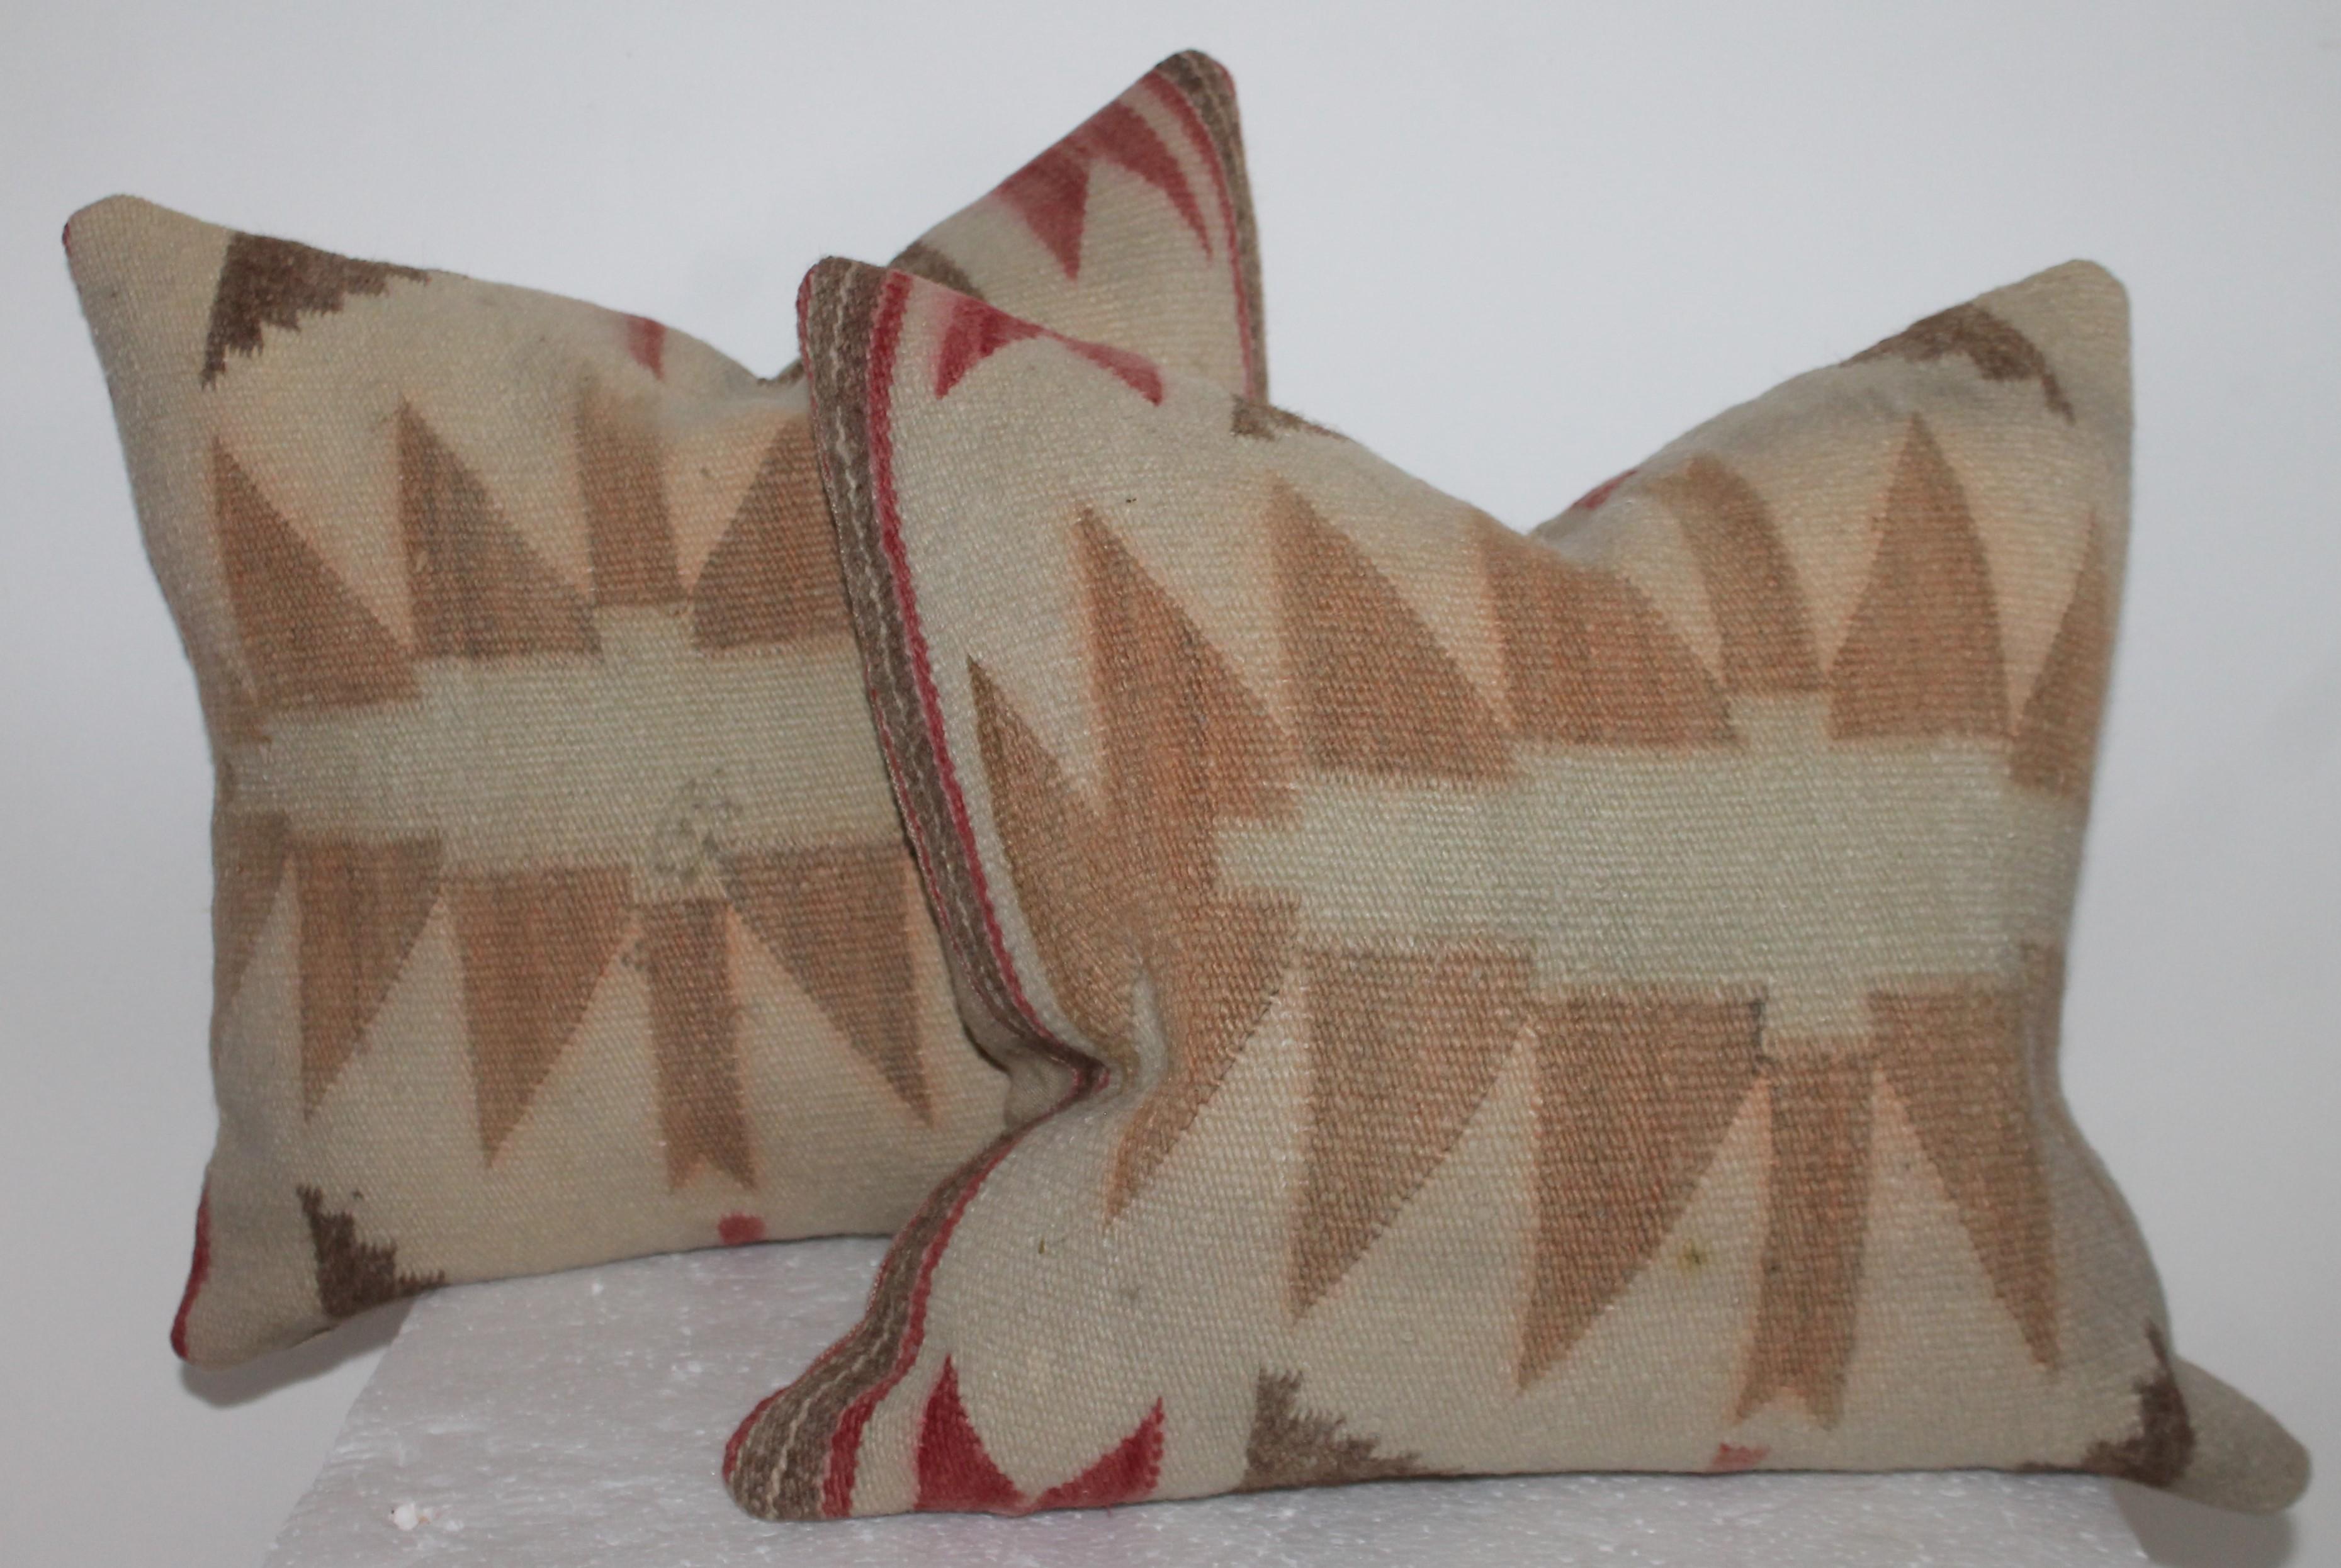 Faded Navajo weaving saddle blanket pillows with linen backings.